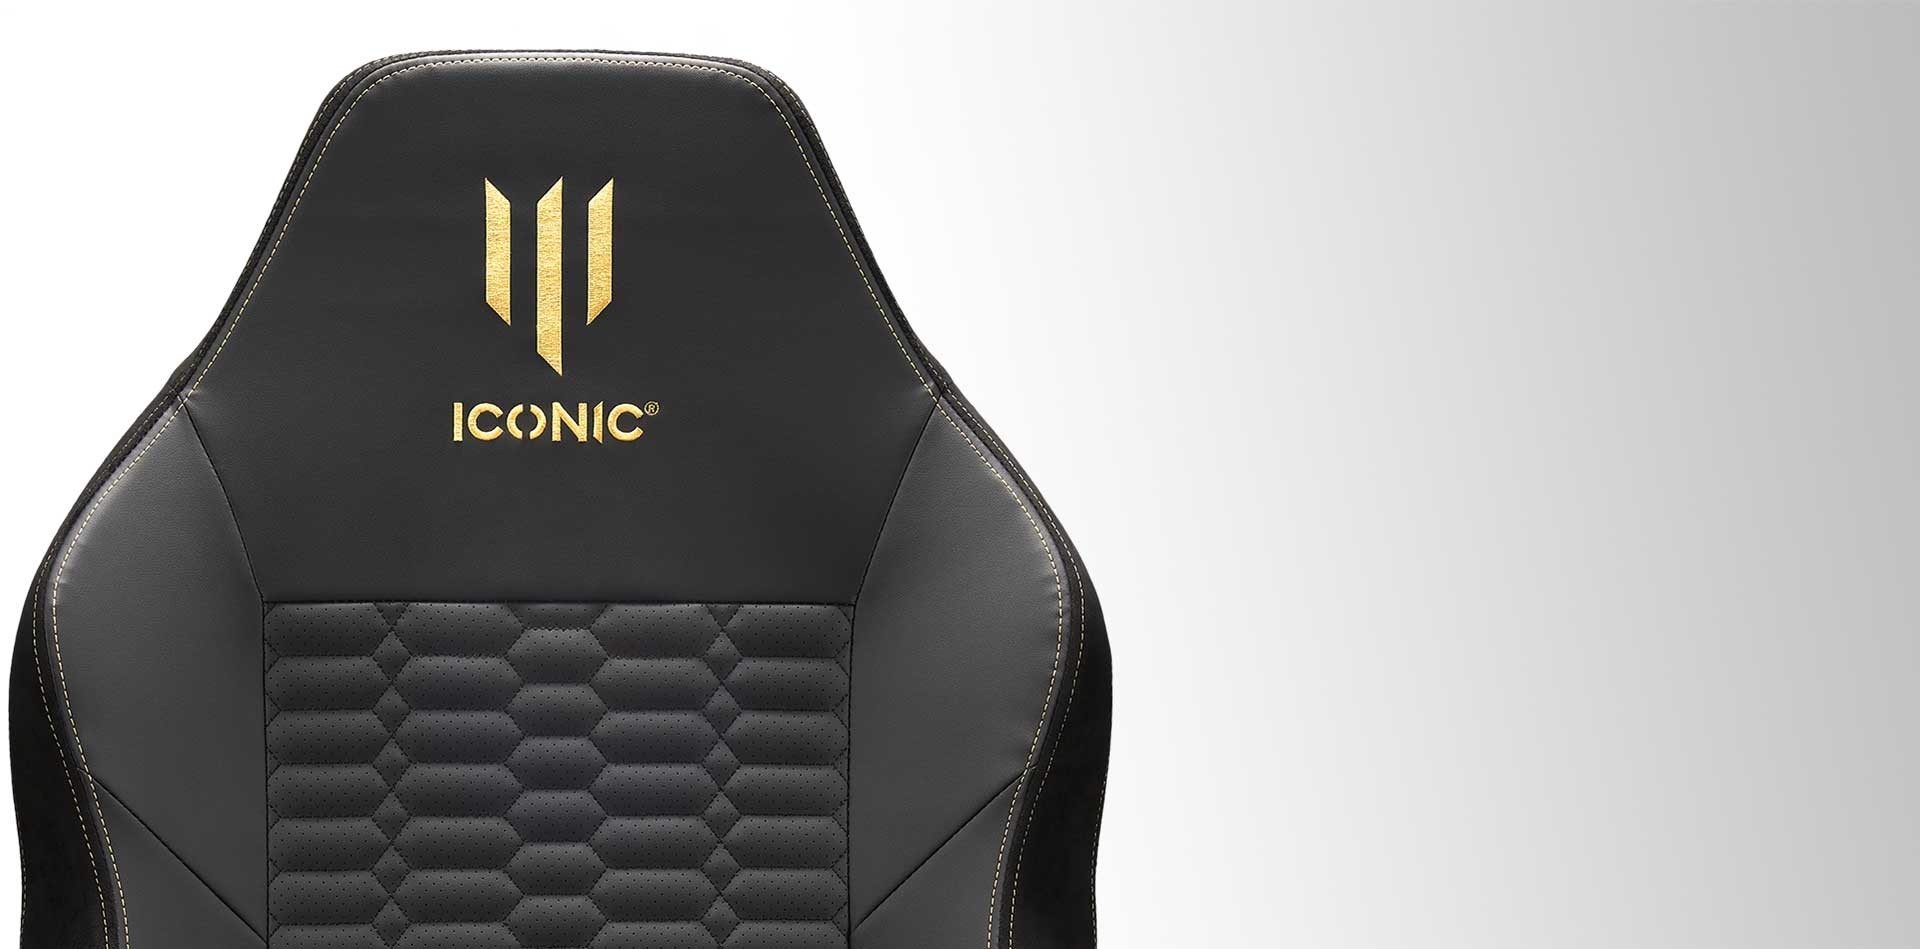 Iconic gaming chair | iconic by Subsonic